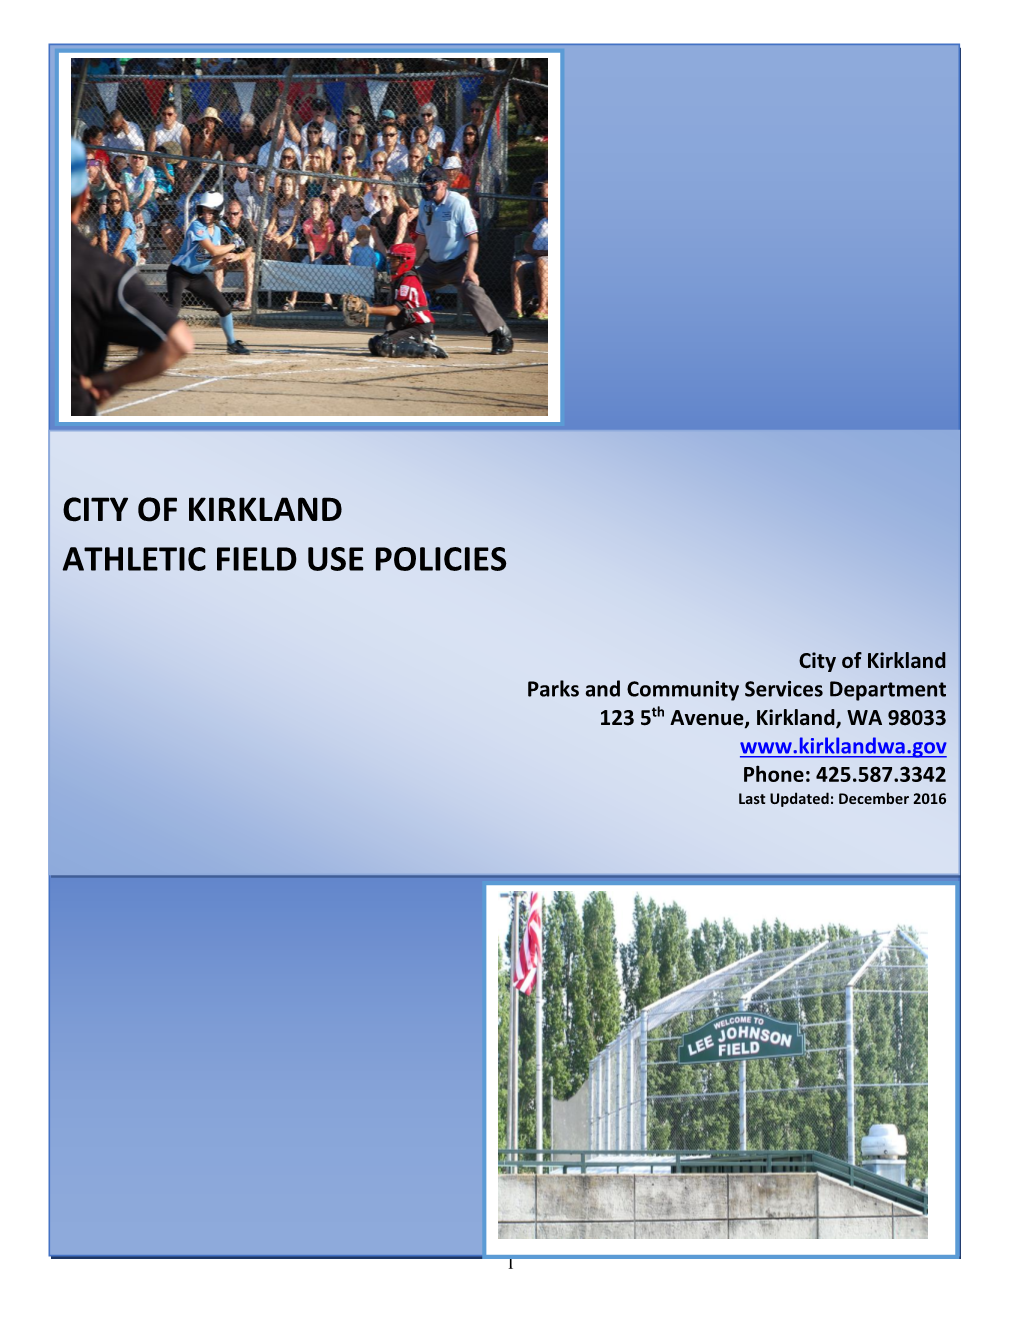 City of Kirkland Athletic Field Use Policies